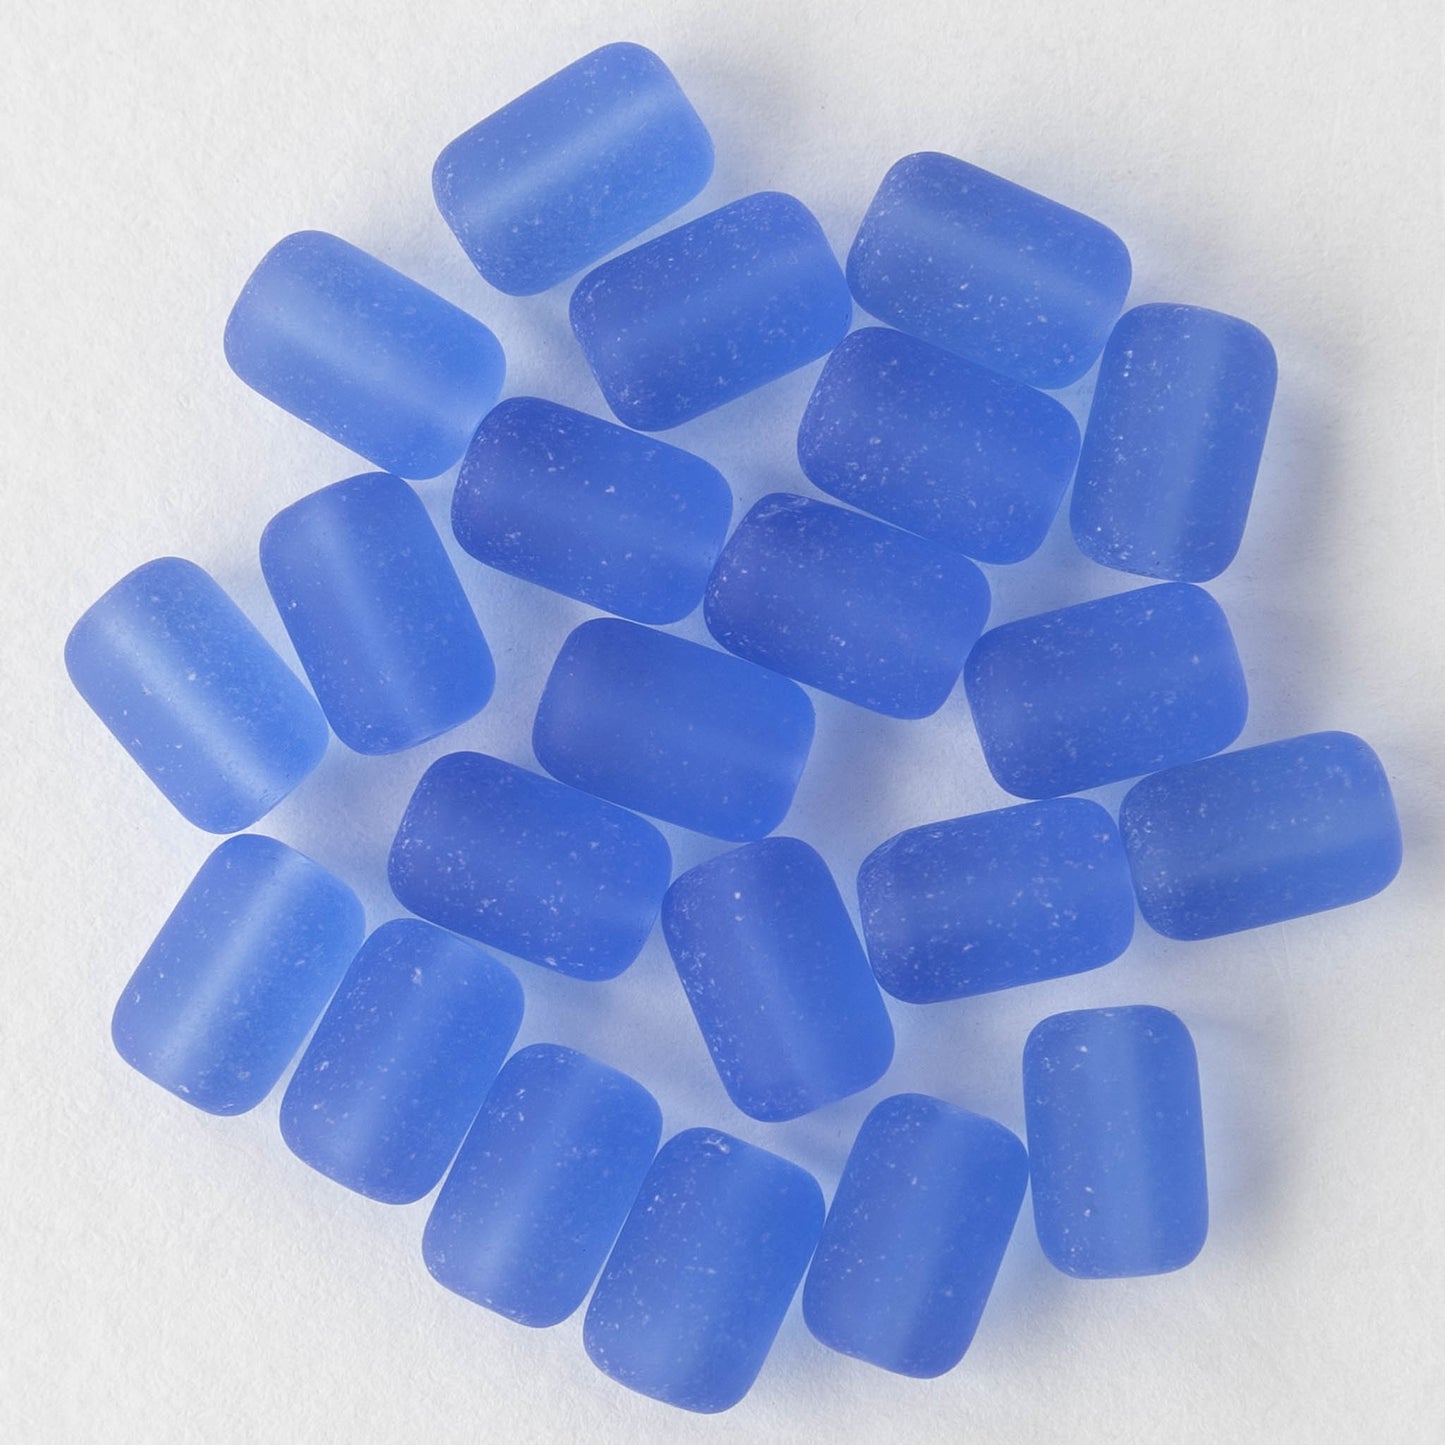 Load image into Gallery viewer, 6x9mm Frosted Glass Tube Beads - Sapphire Blue - 26 beads
